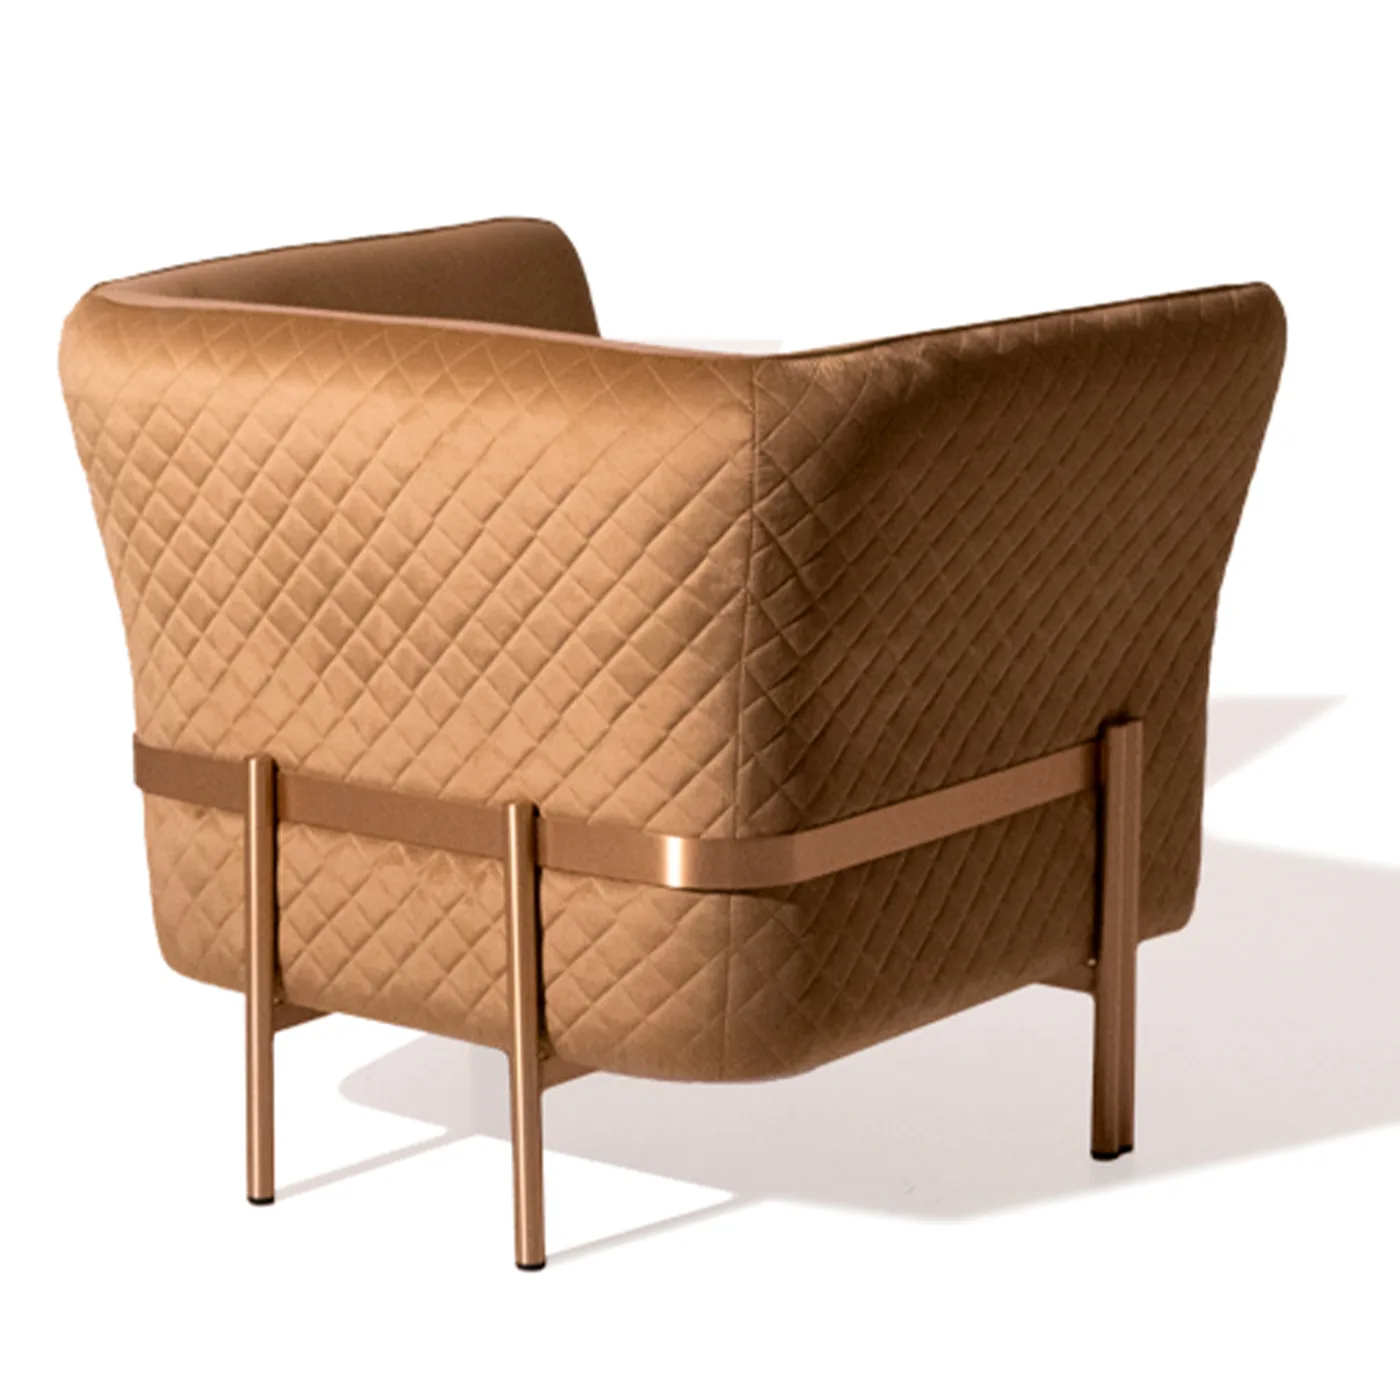 UNIVERSAL ARMCHAIR BY MARCO AND GIULIO MANTELLASSI